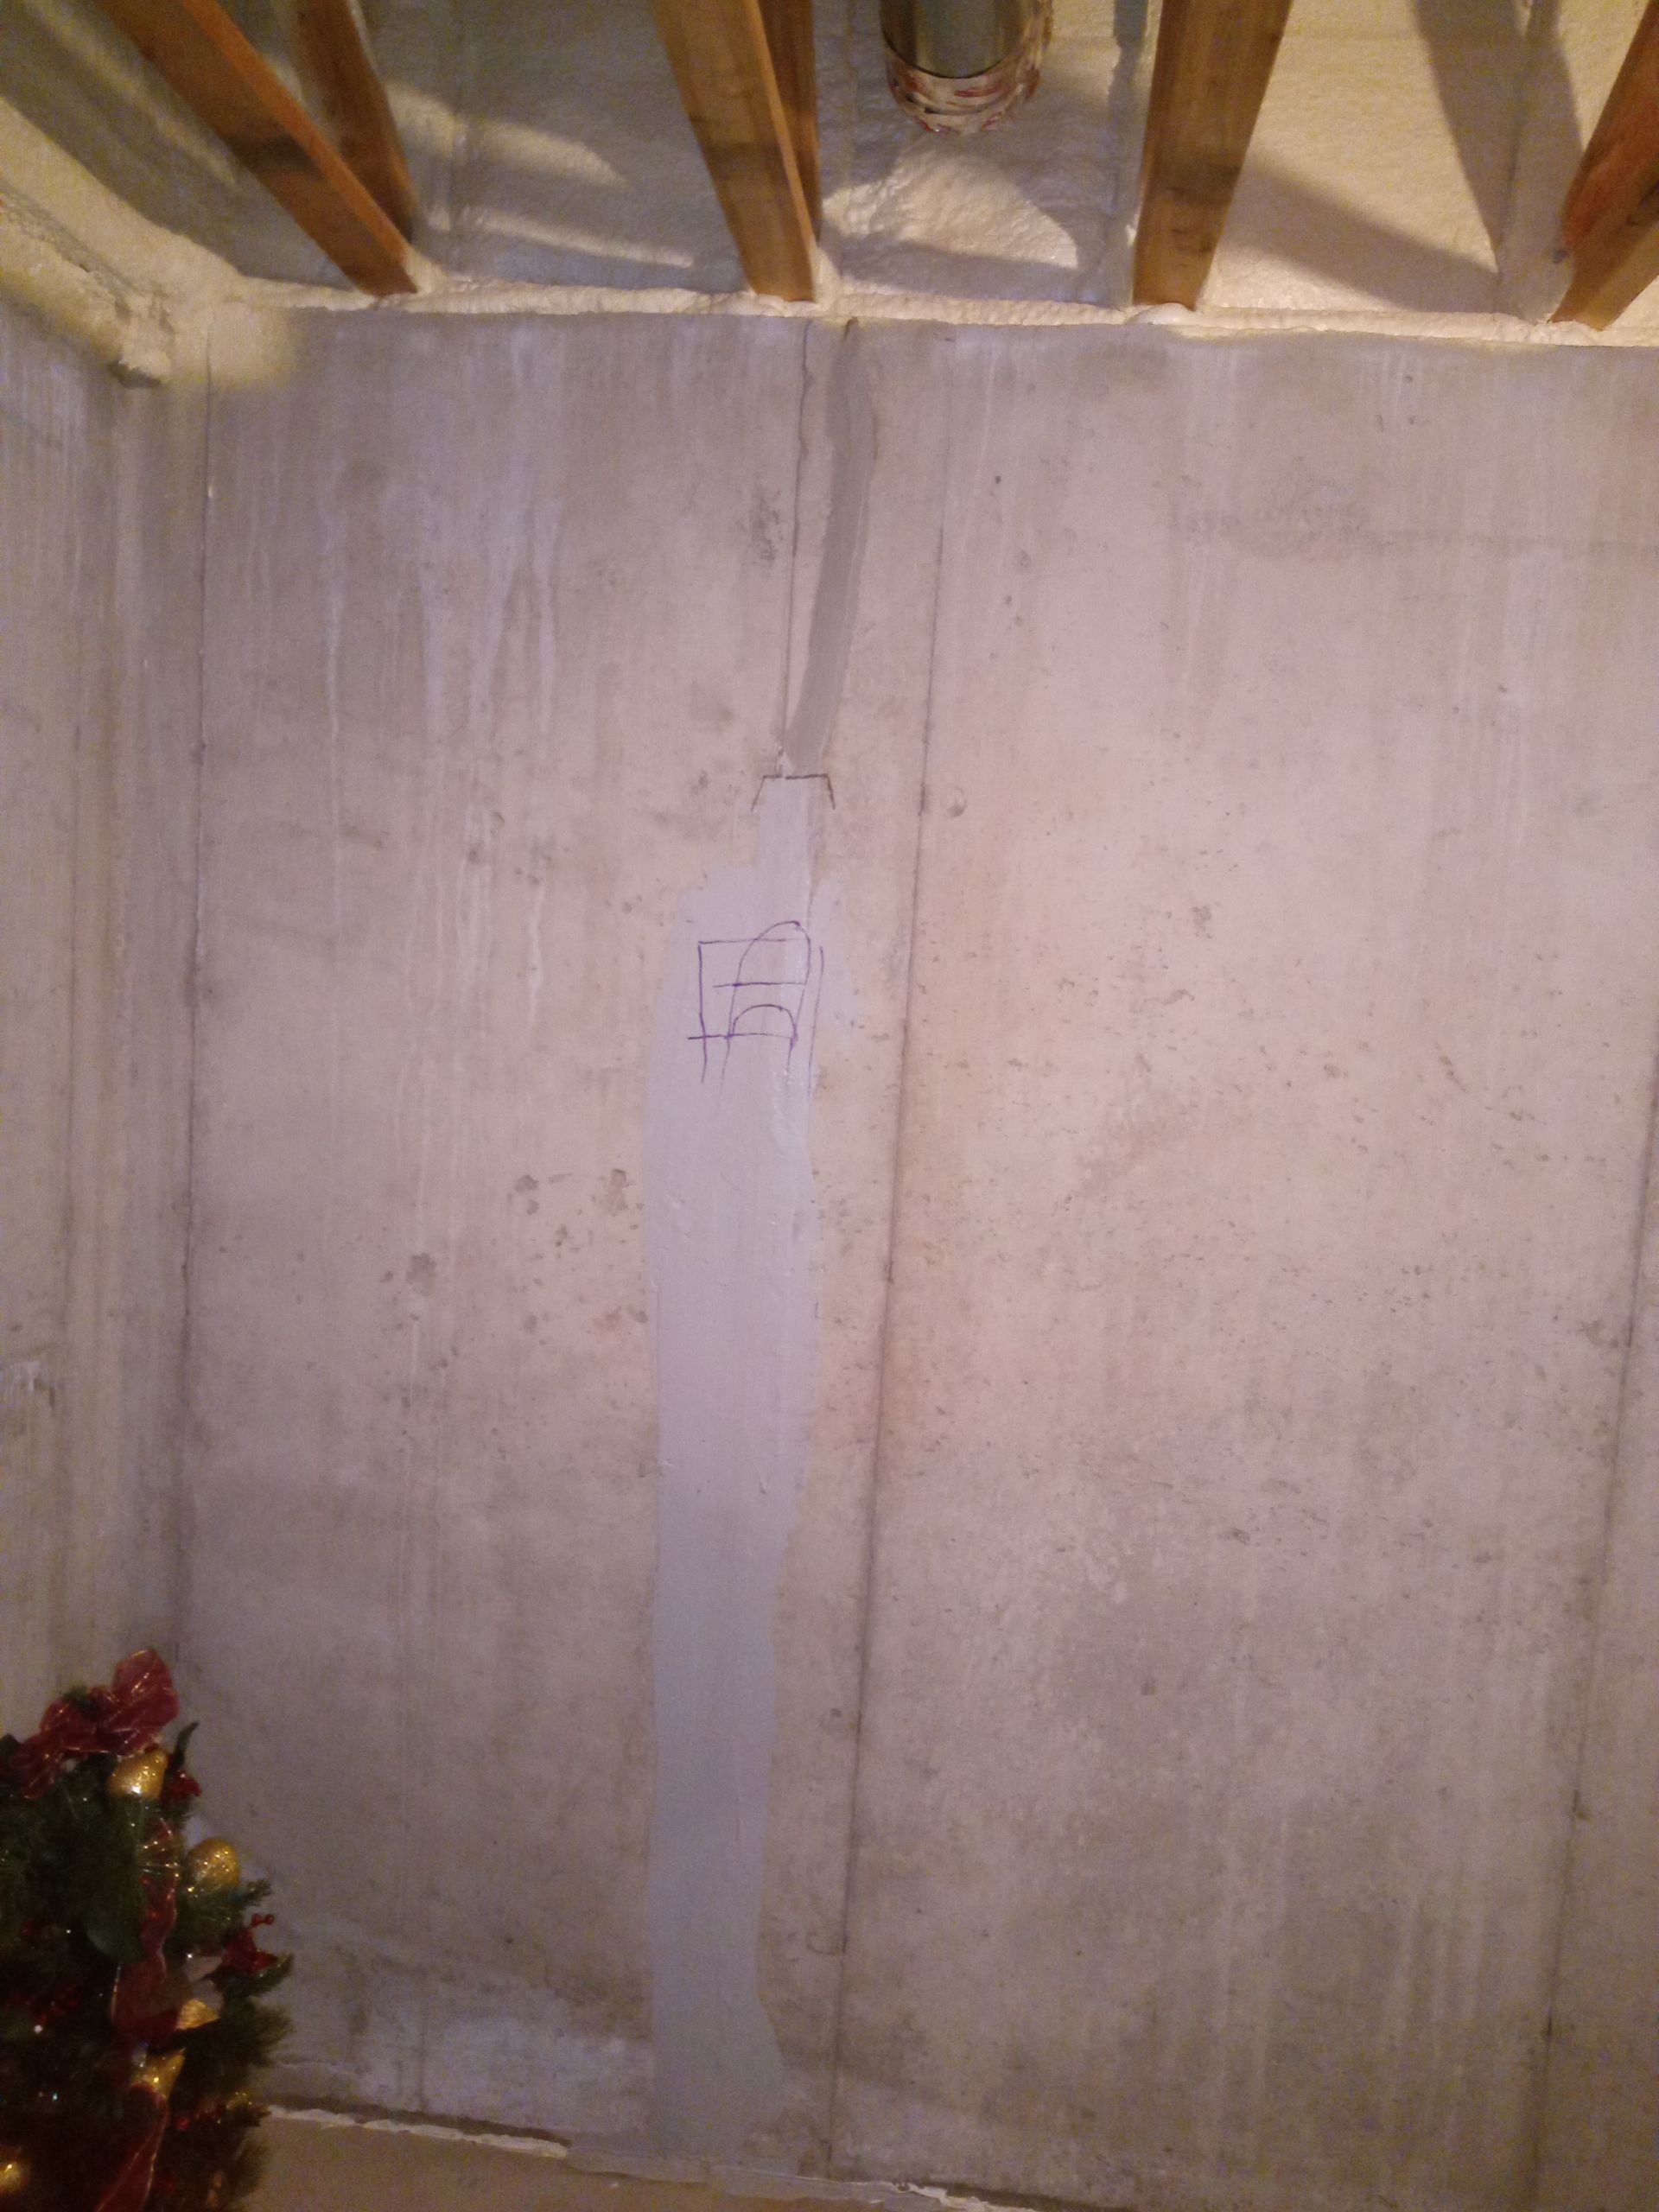 Poured Basement Foundation Wall is Leaking